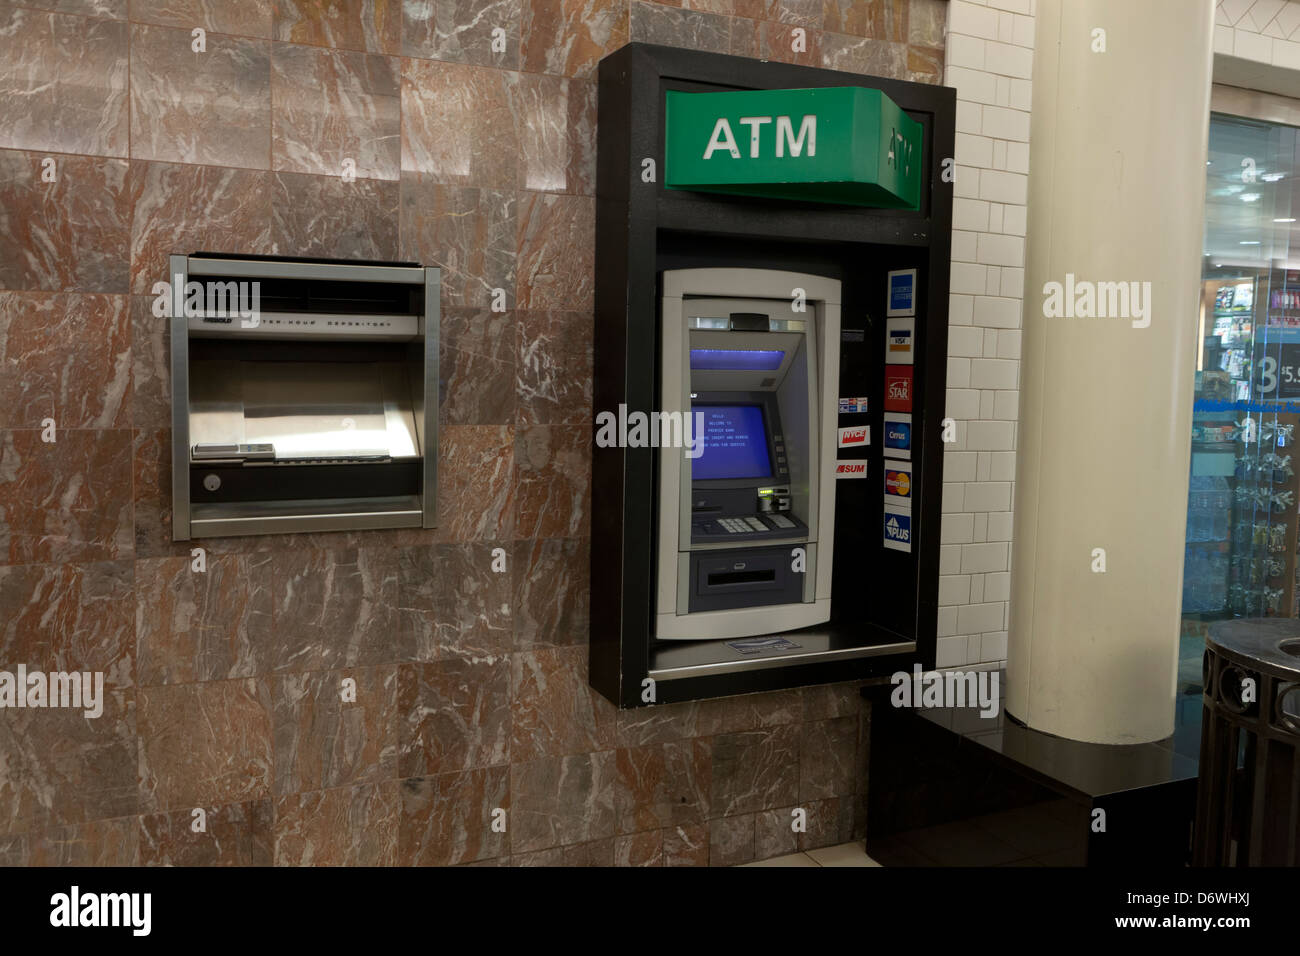 ATM machine on wall Stock Photo